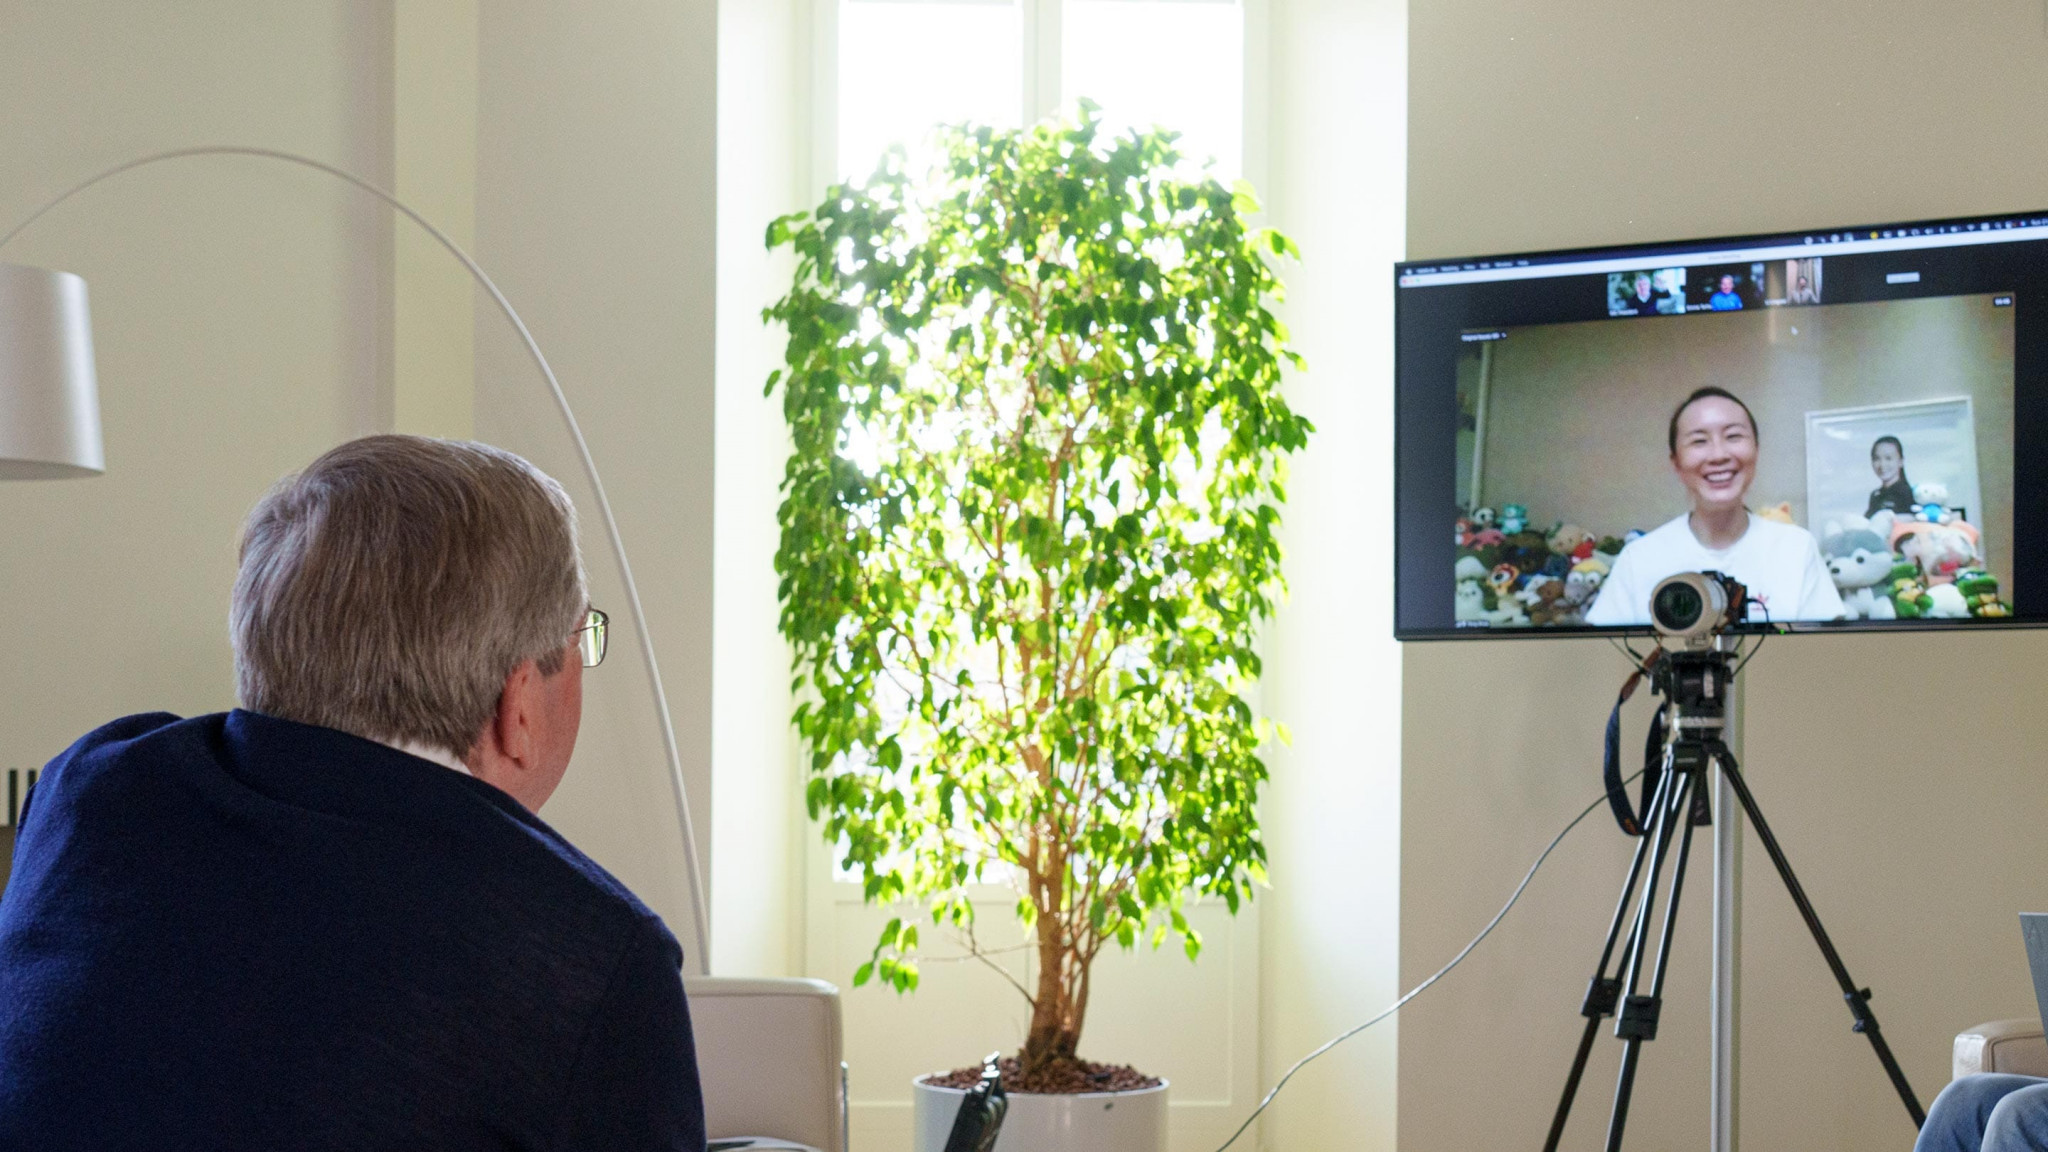 IOC President Thomas Bach held a much-criticised video call with Peng Shuai last month ©IOC